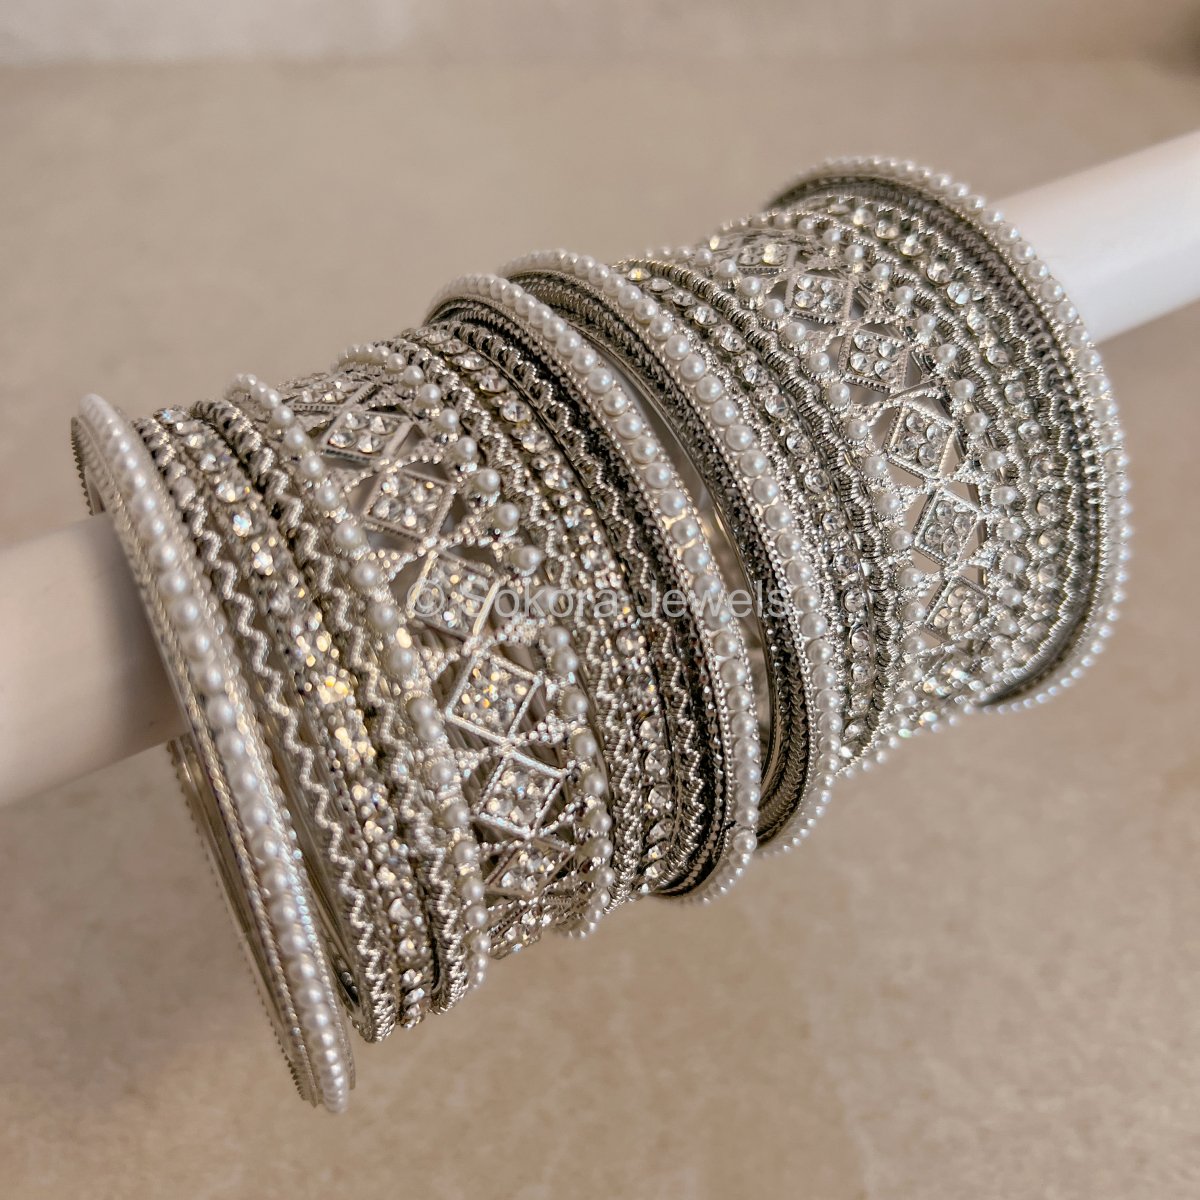 Bangles and Bracelets - Buy Bangles and Bracelets Online | Gift Delivery in  India, USA, UK